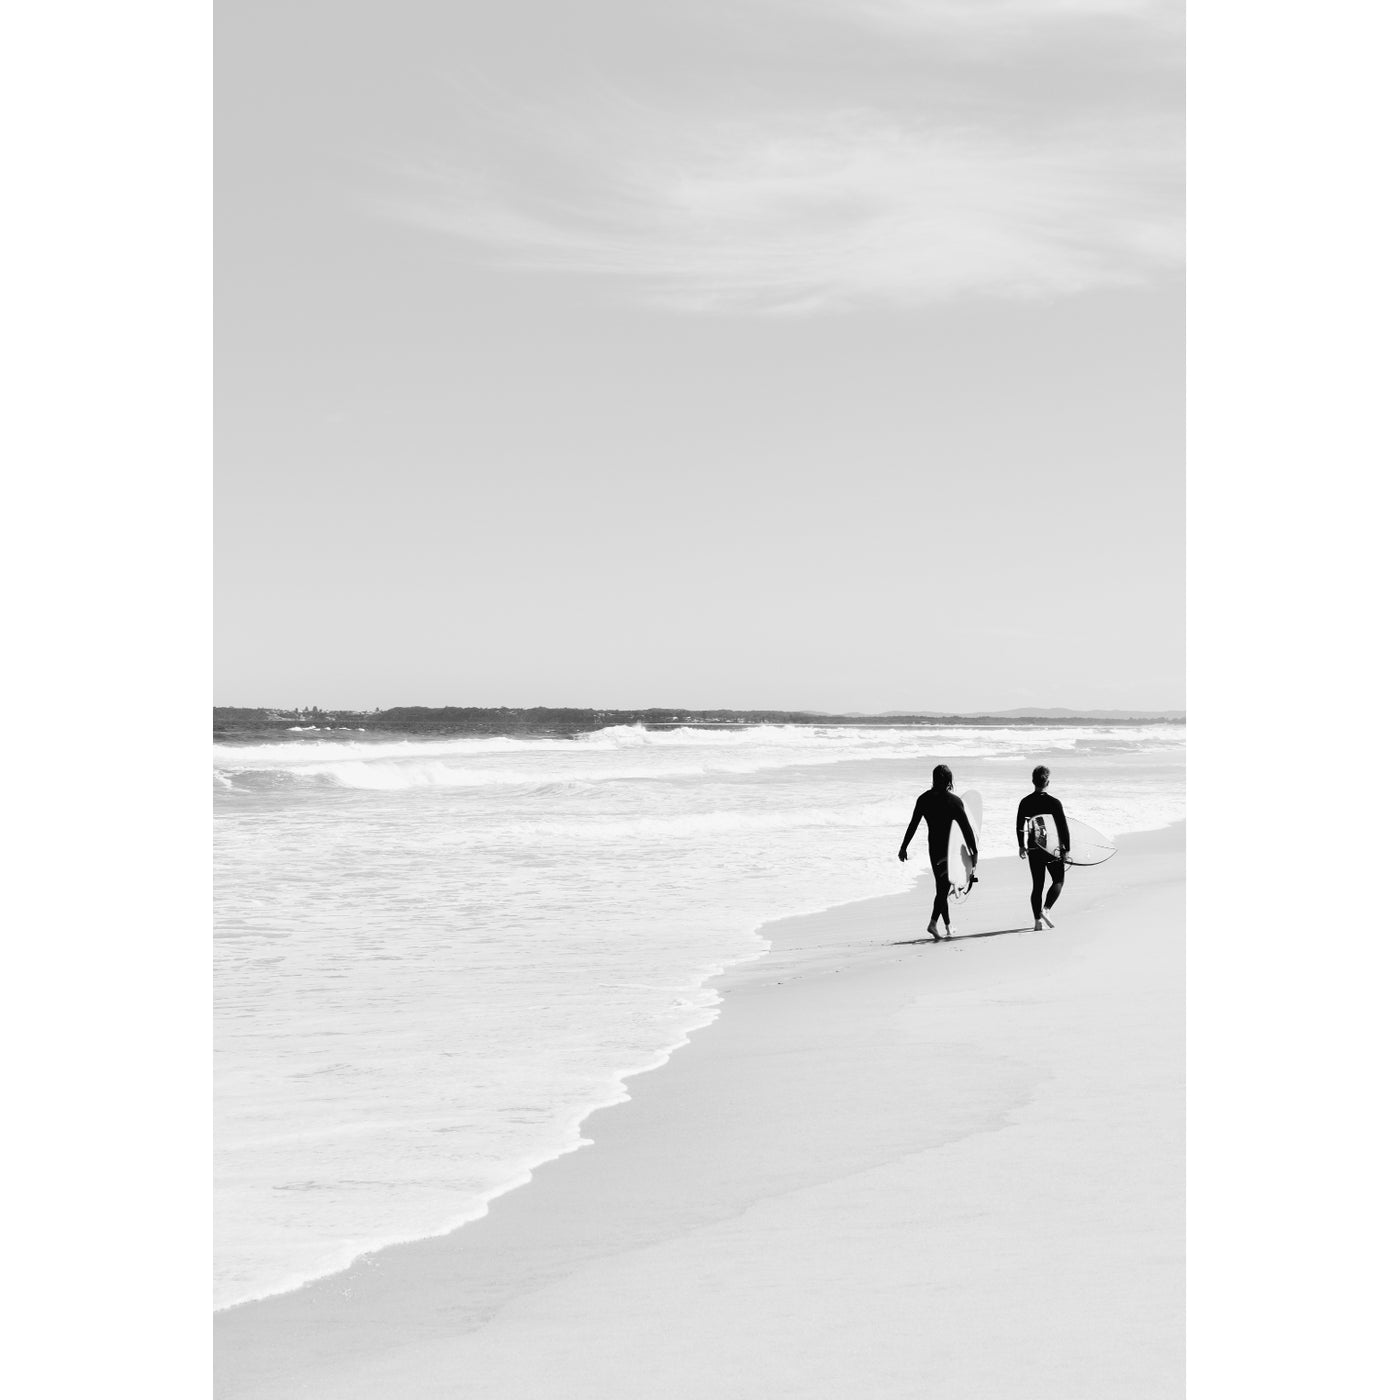 Two Surfers